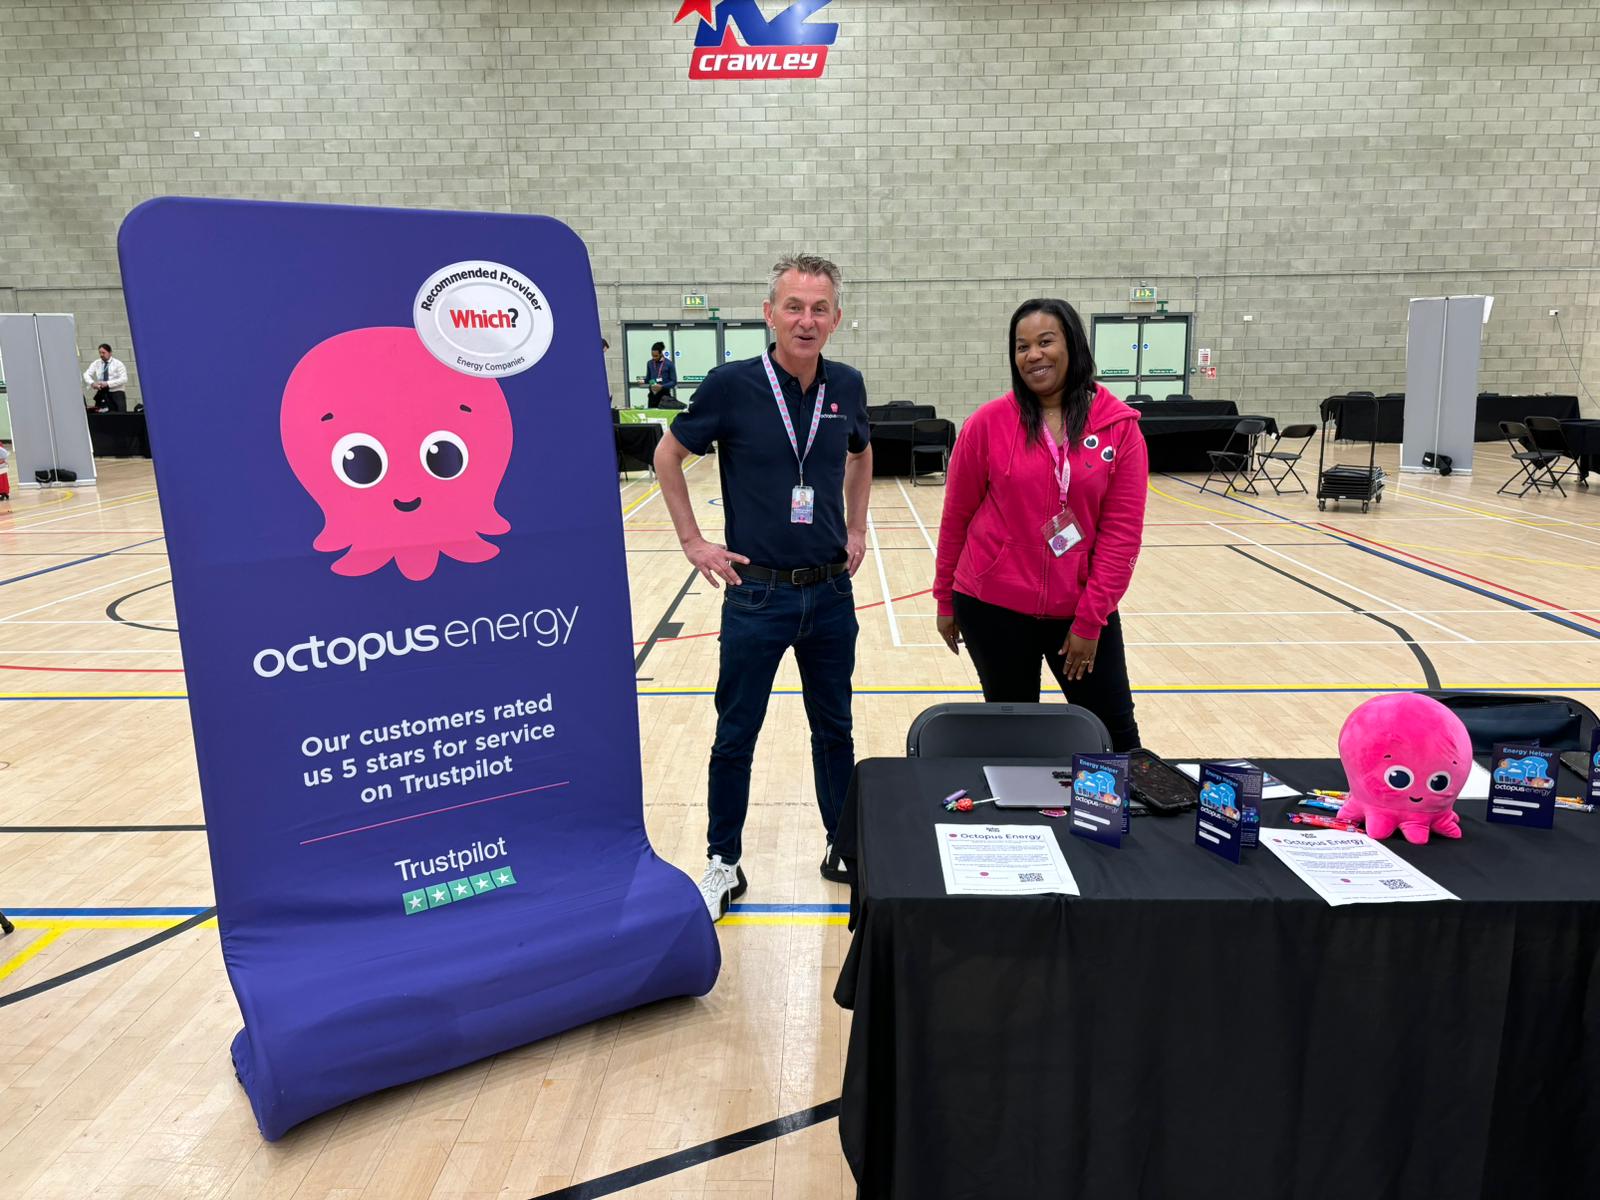 Octopus Energy at our event in Crawley